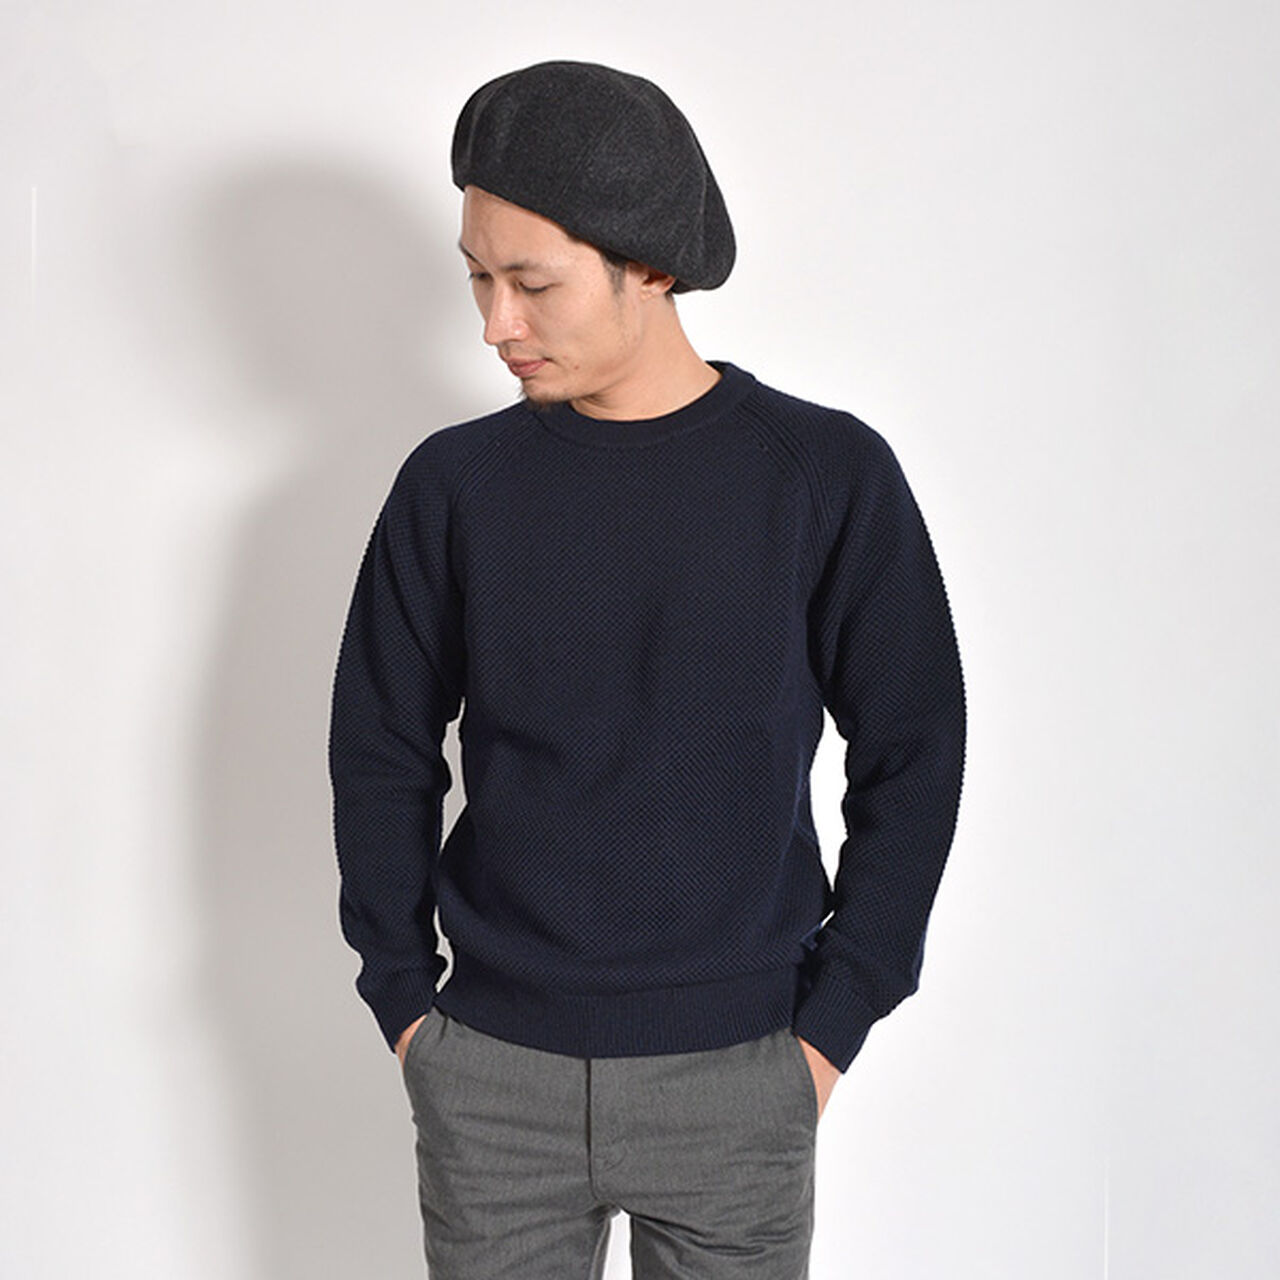 Tuck Moss Crew Neck Sweater 8 Gauge Knit,Navy, large image number 0